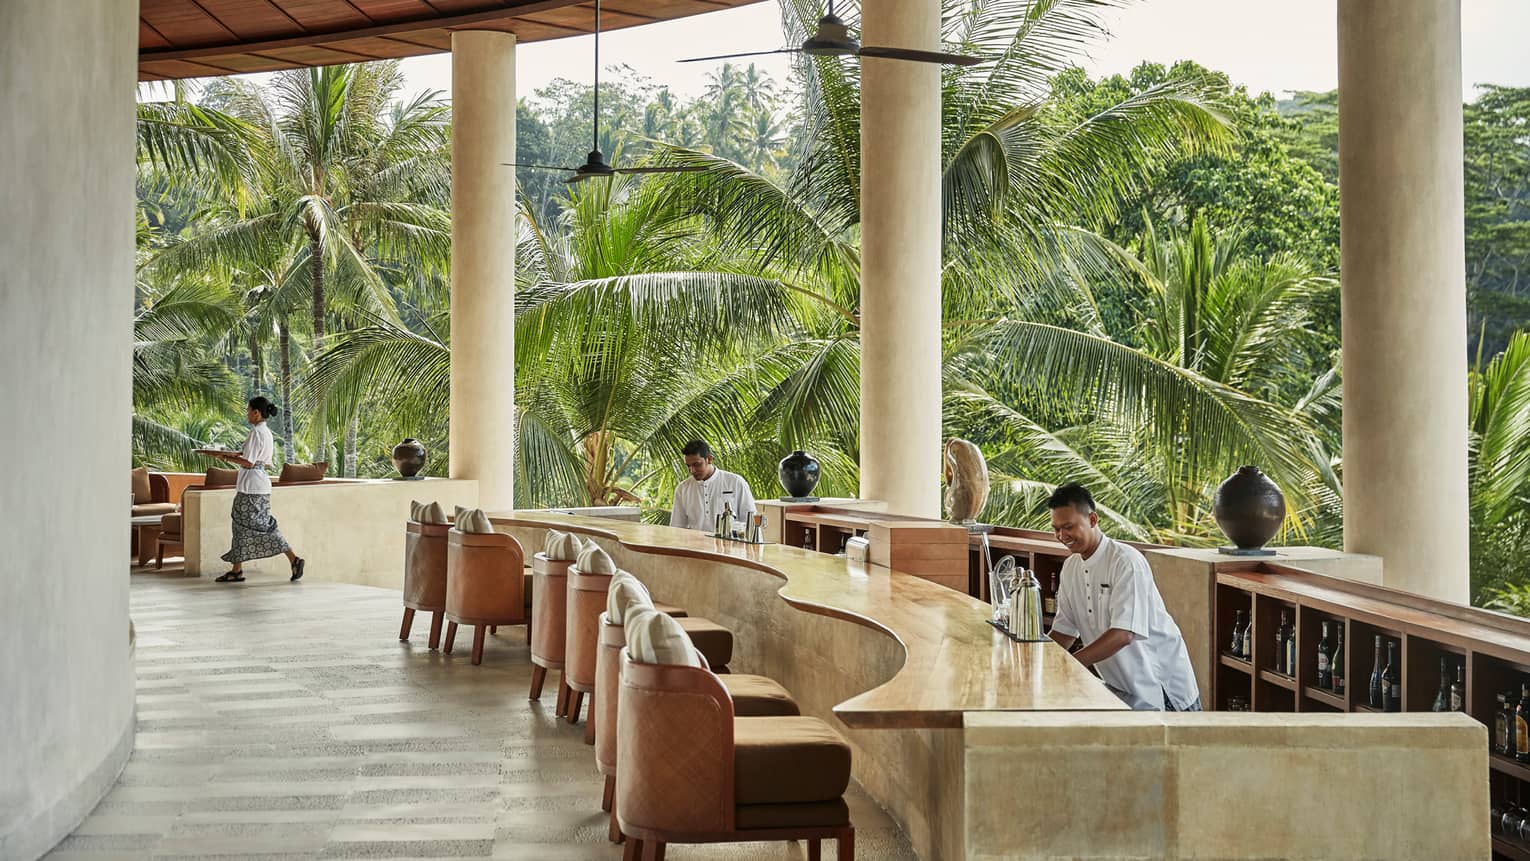 Smiling bartenders behind long wood-and-stone bar under white pillars of resort balcony, palm trees in background